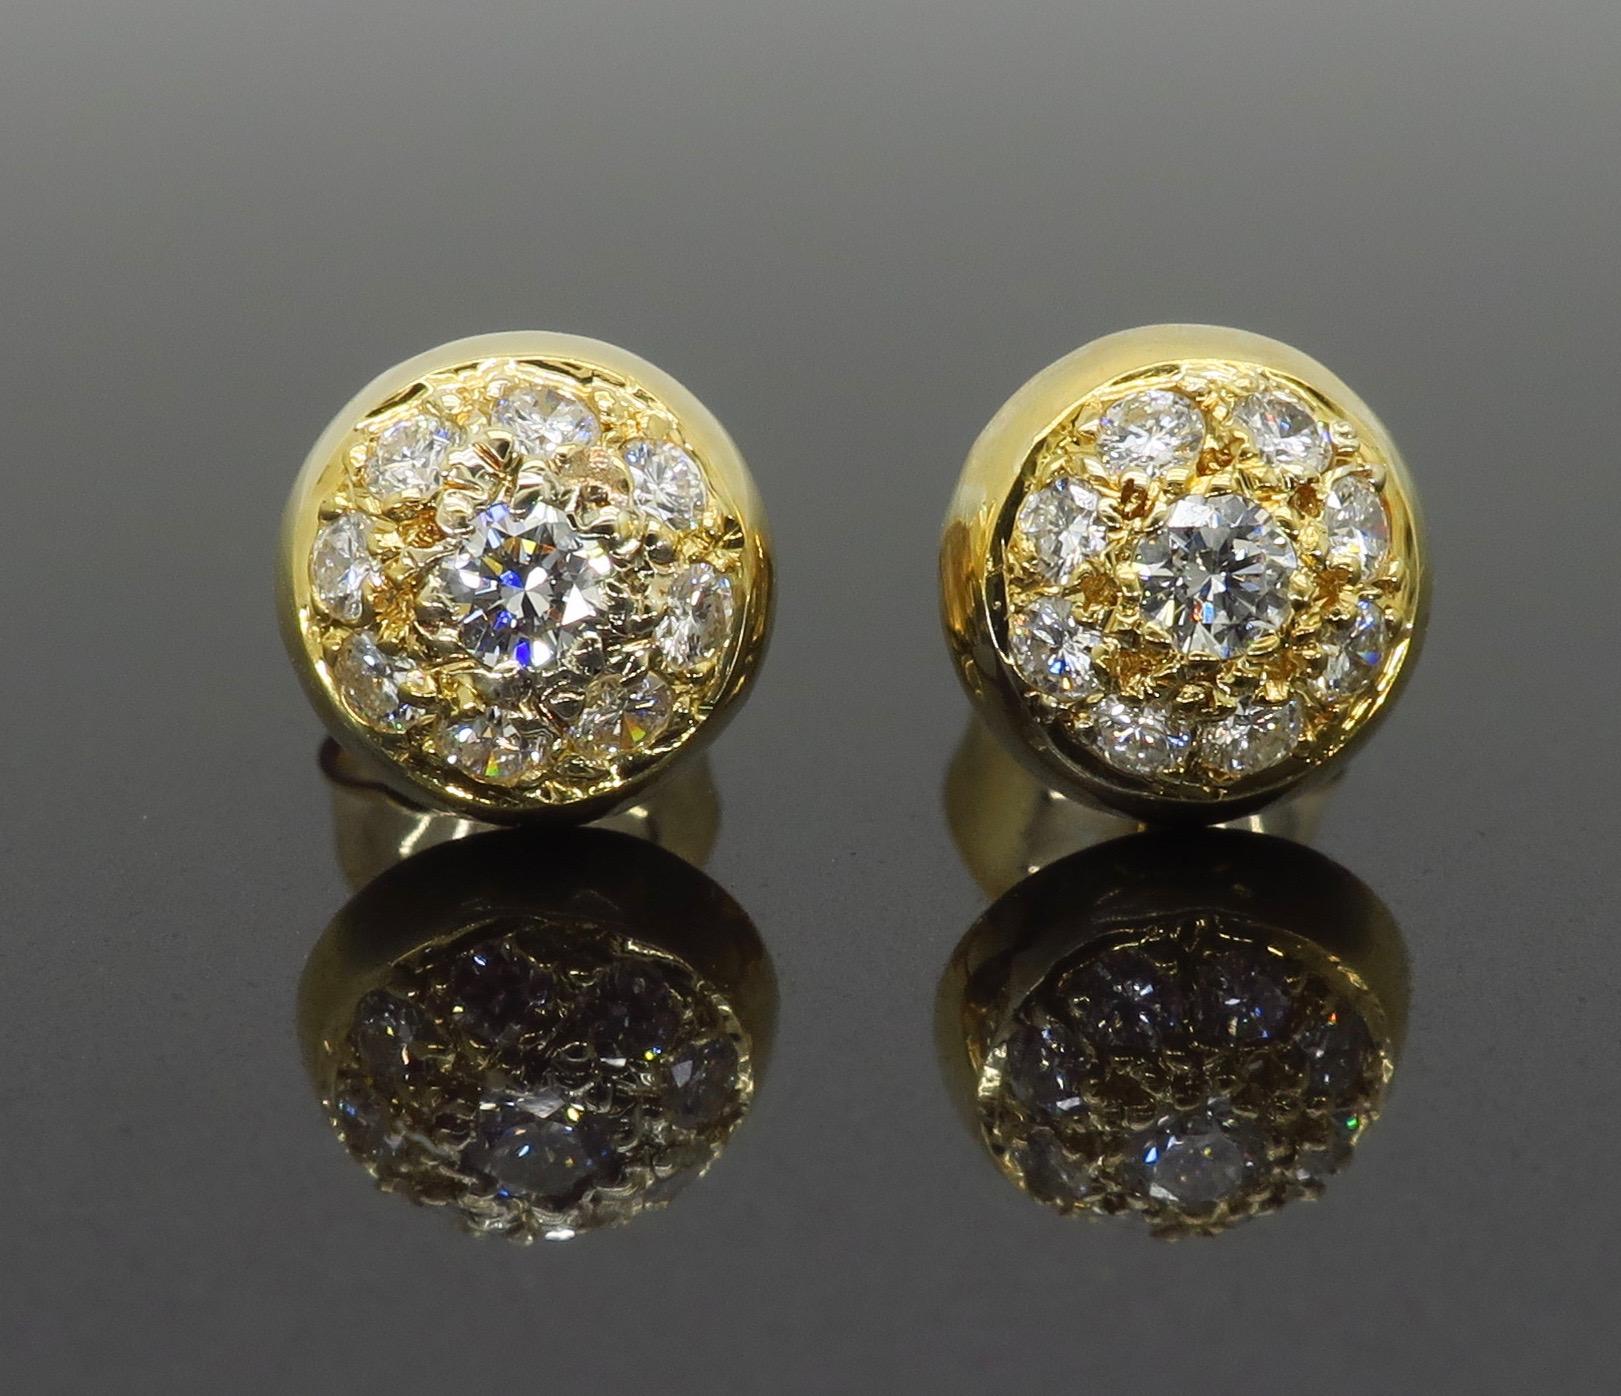 Round Brilliant Cut cluster diamond earrings crafted in 18k yellow gold.

Gemstone: Diamond 
Diamond Cut: 18 Round Brilliant Cut Diamonds
Average Diamond Color: G-I
Average Diamond Clarity: VS
Diamond Carat Weight: Approximately .50CTW
Metal: 18K